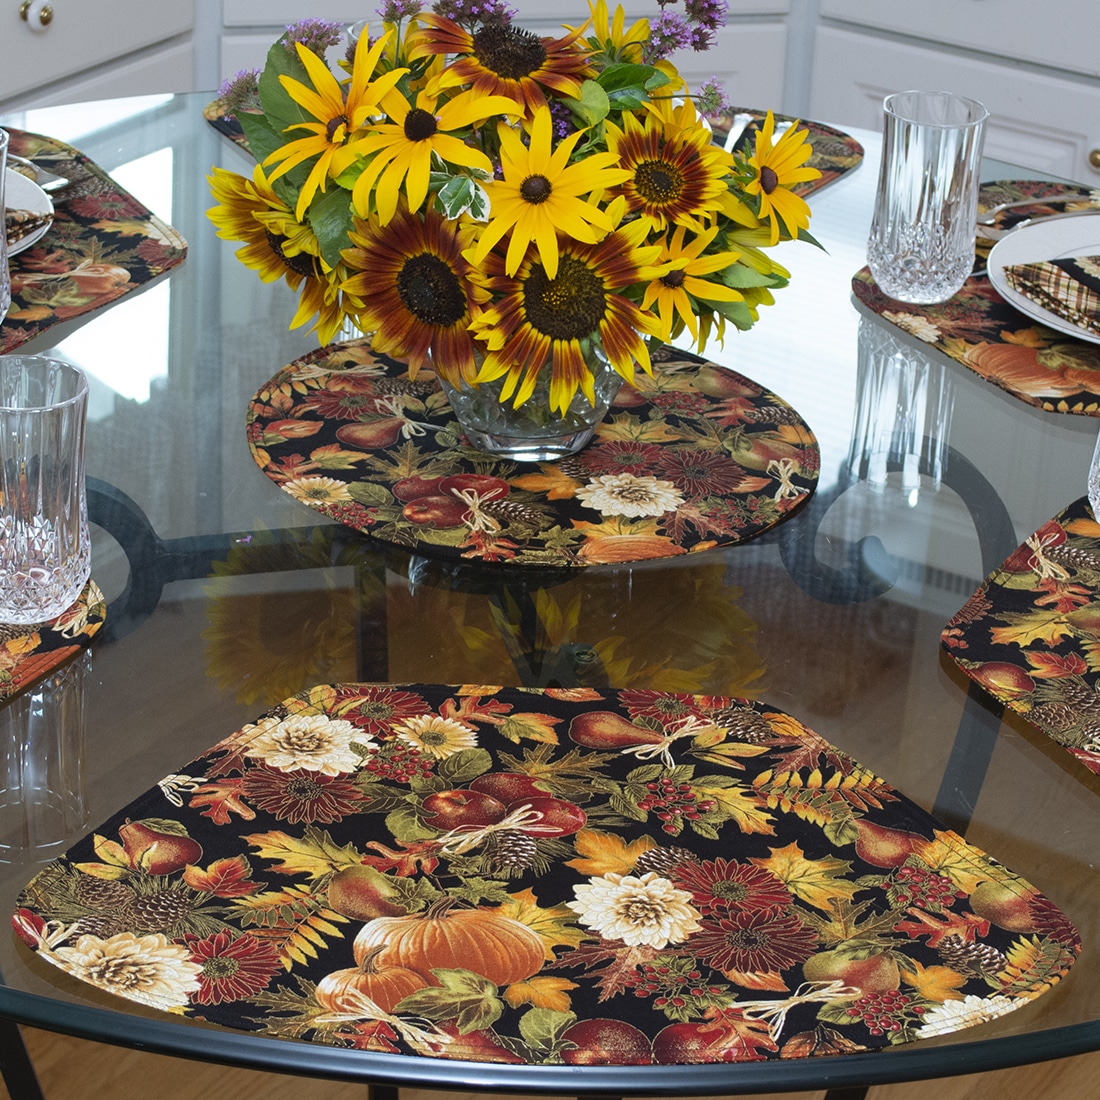 Sweet Pea Linens - Fall Harvest Leaf Print Wedge-Shaped Placemats - Set of Two (SKU#: RS2-1006-Z4) - Table Setting